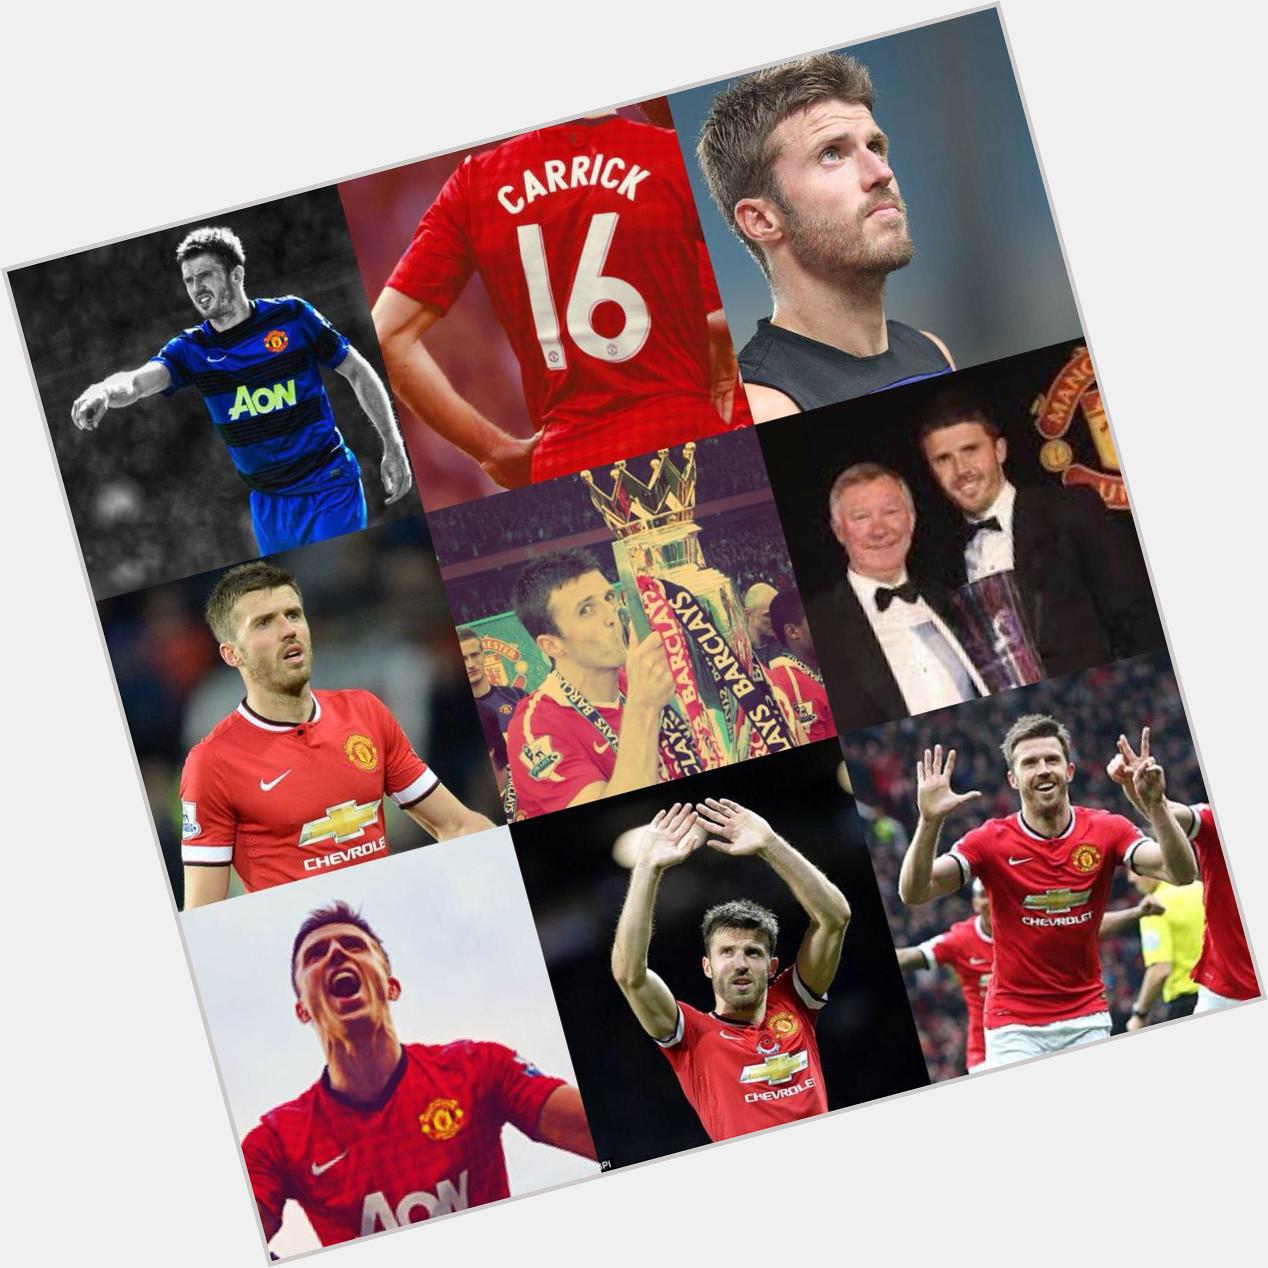 Happy Birthday Michael Carrick

Hope plays more games next season, a rock in our midfield 